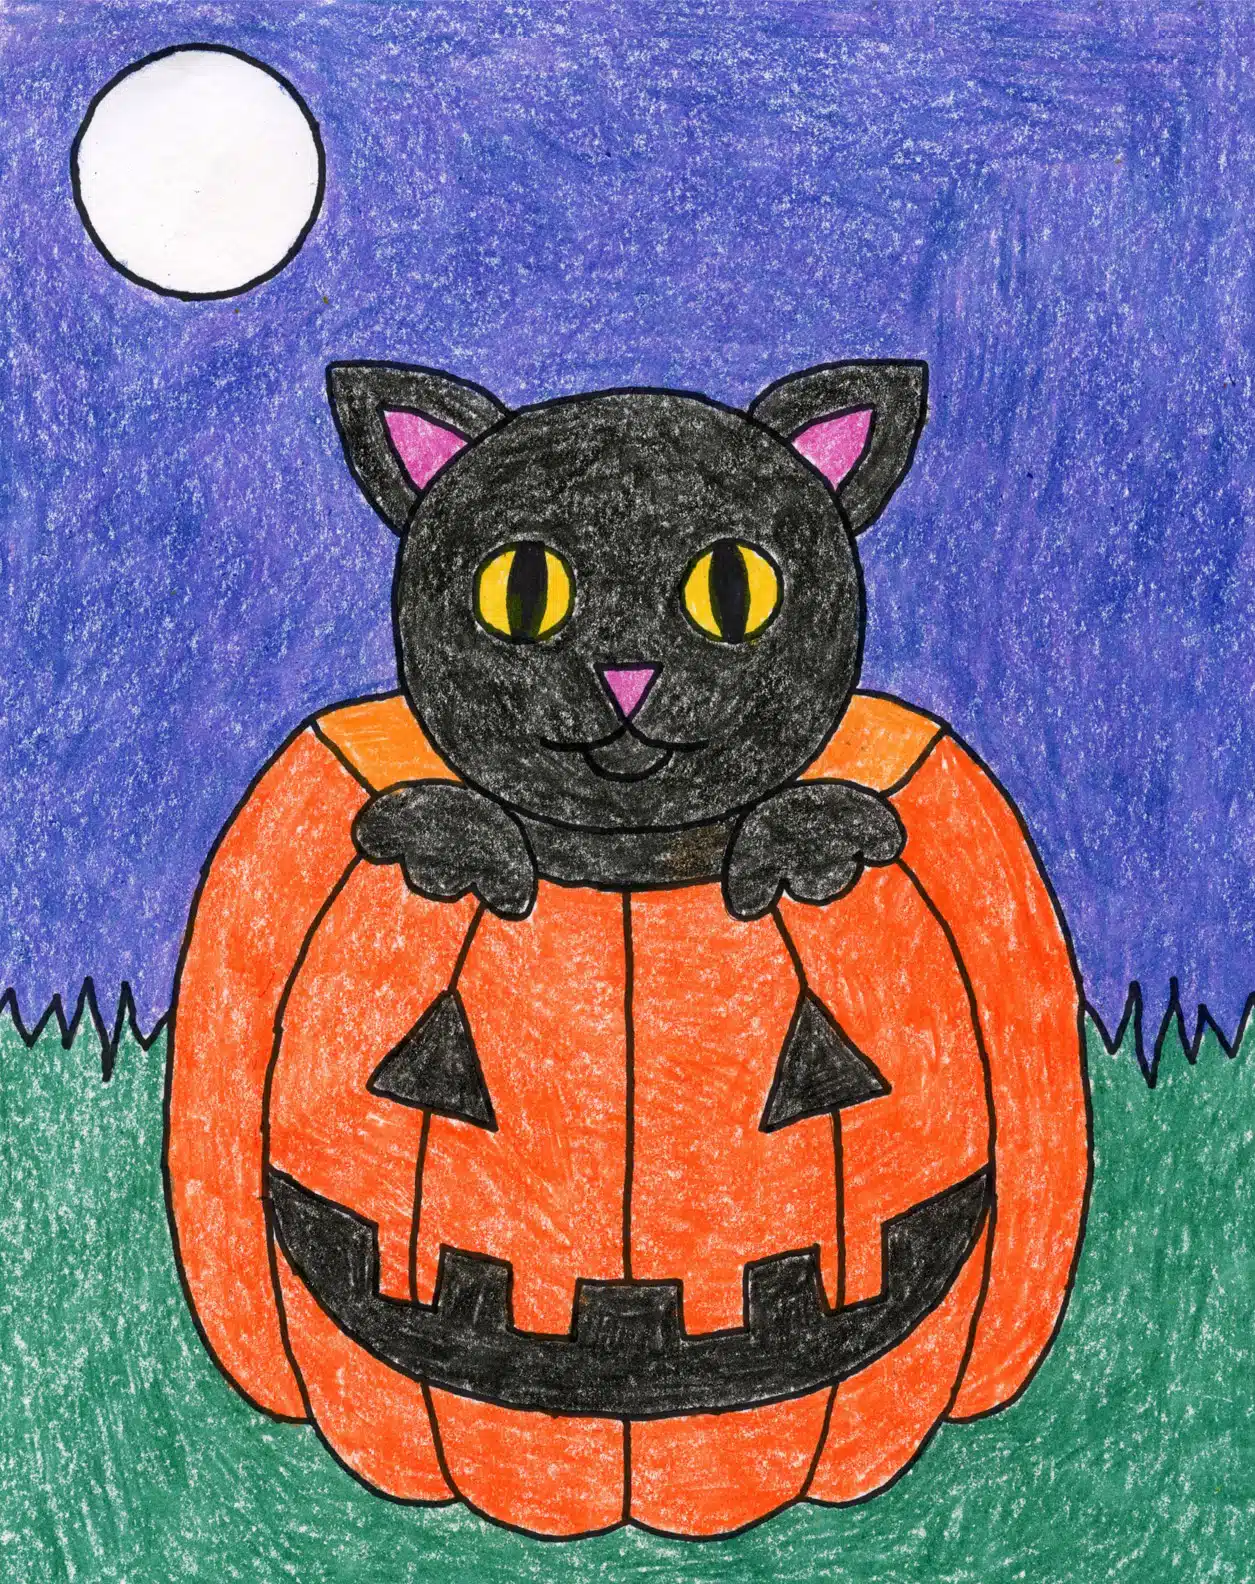 How to Draw a Halloween Cat Tutorial Video and Halloween Cat Coloring Page